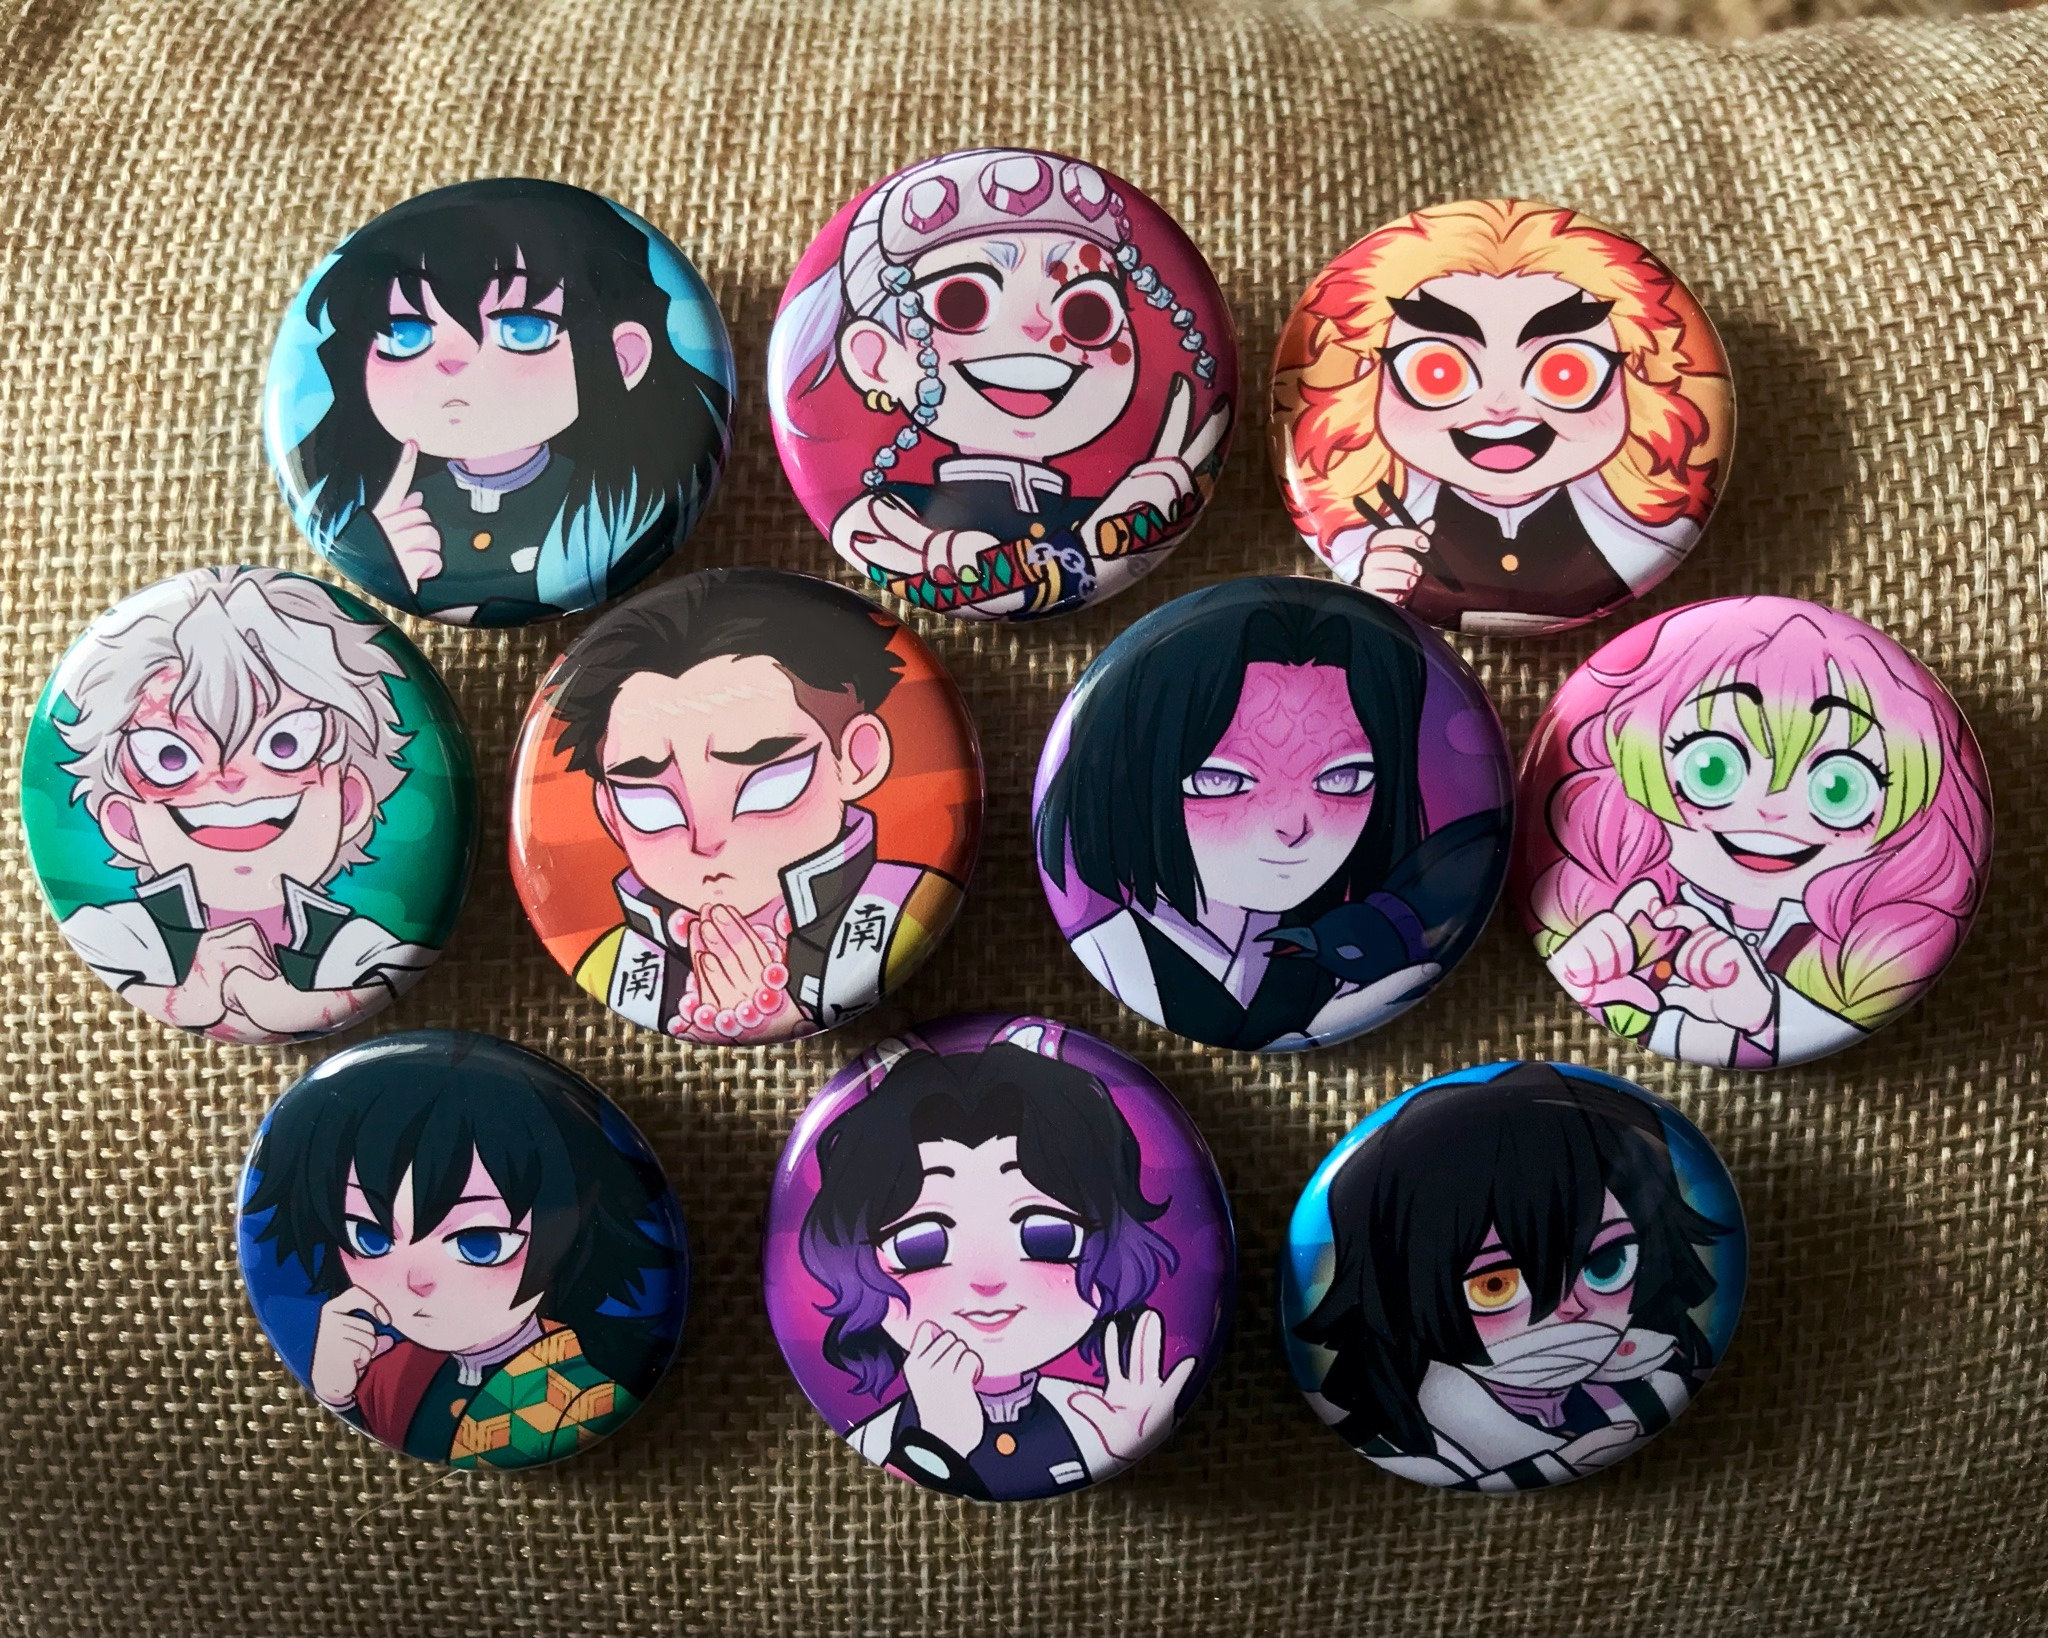 Kny Buttons 